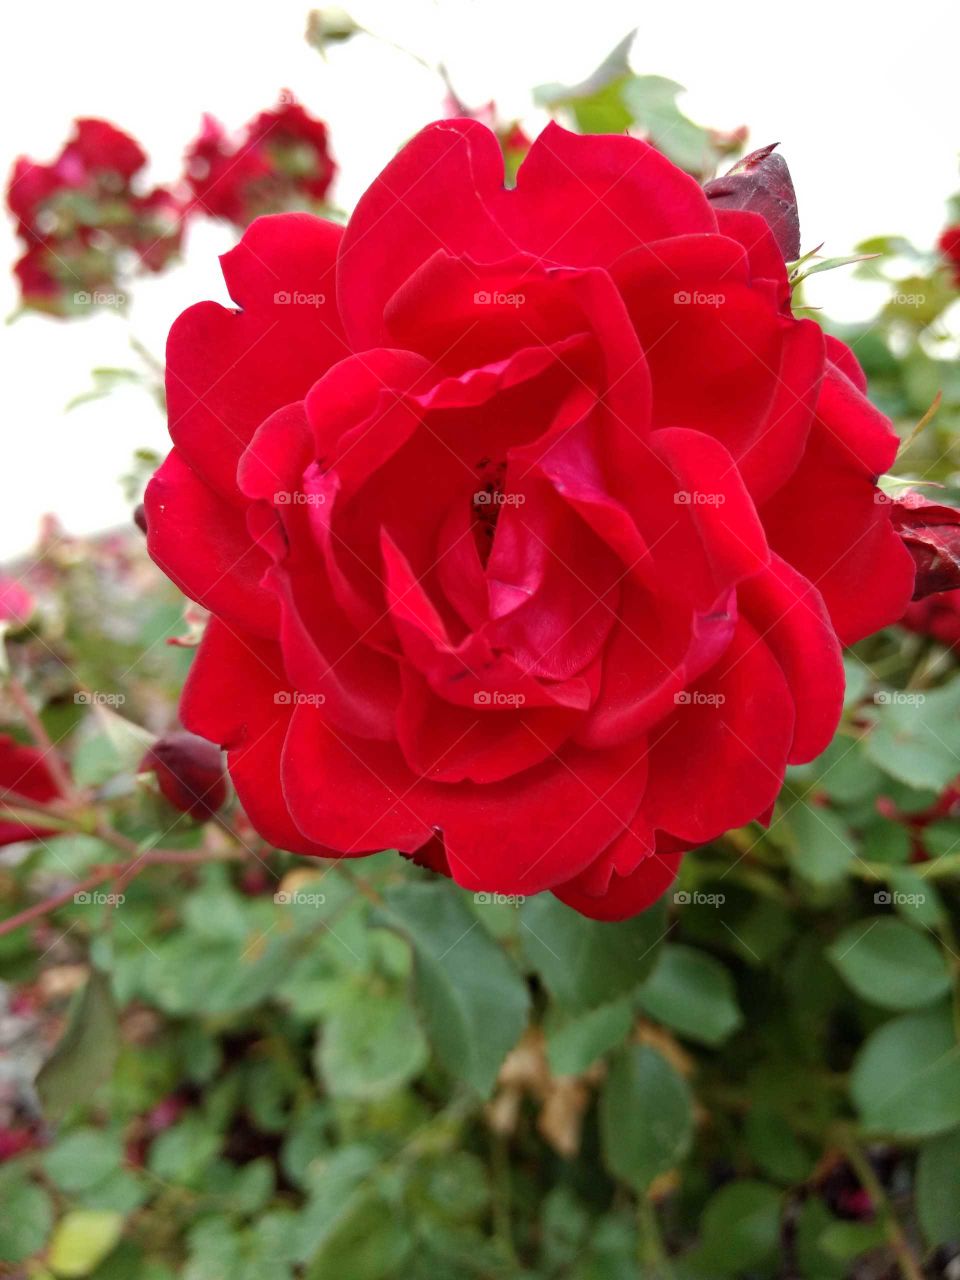 Brilliant red rose on the bush - close-up